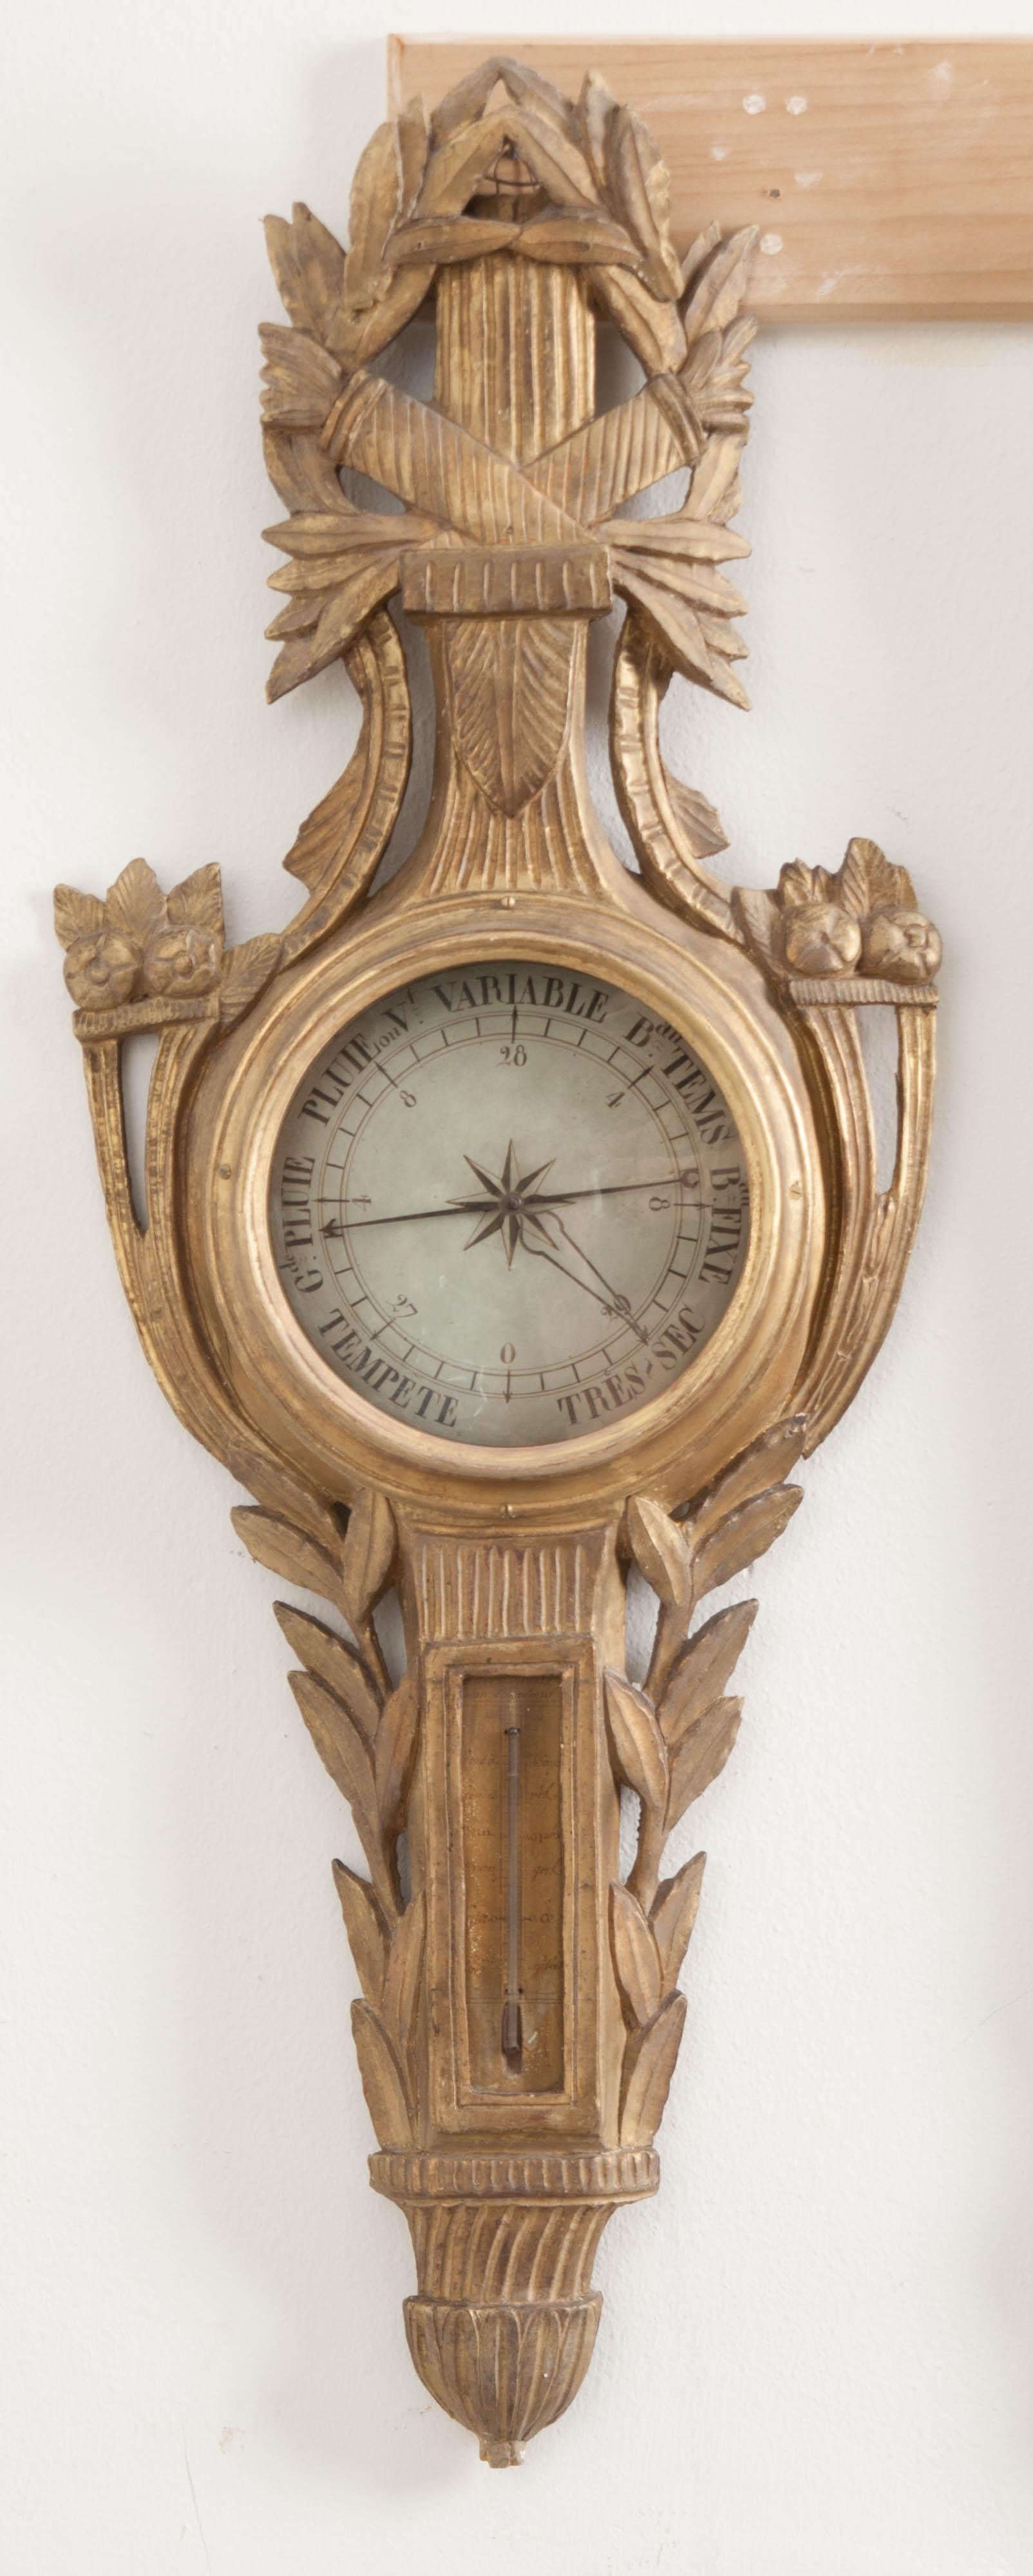 A gorgeous gold gilt barometer from the early part of the 19th century, France. This early scientific instrument was used to measure atmospheric pressure in order to better predict the weather. This antique piece has both a barometer as well as a